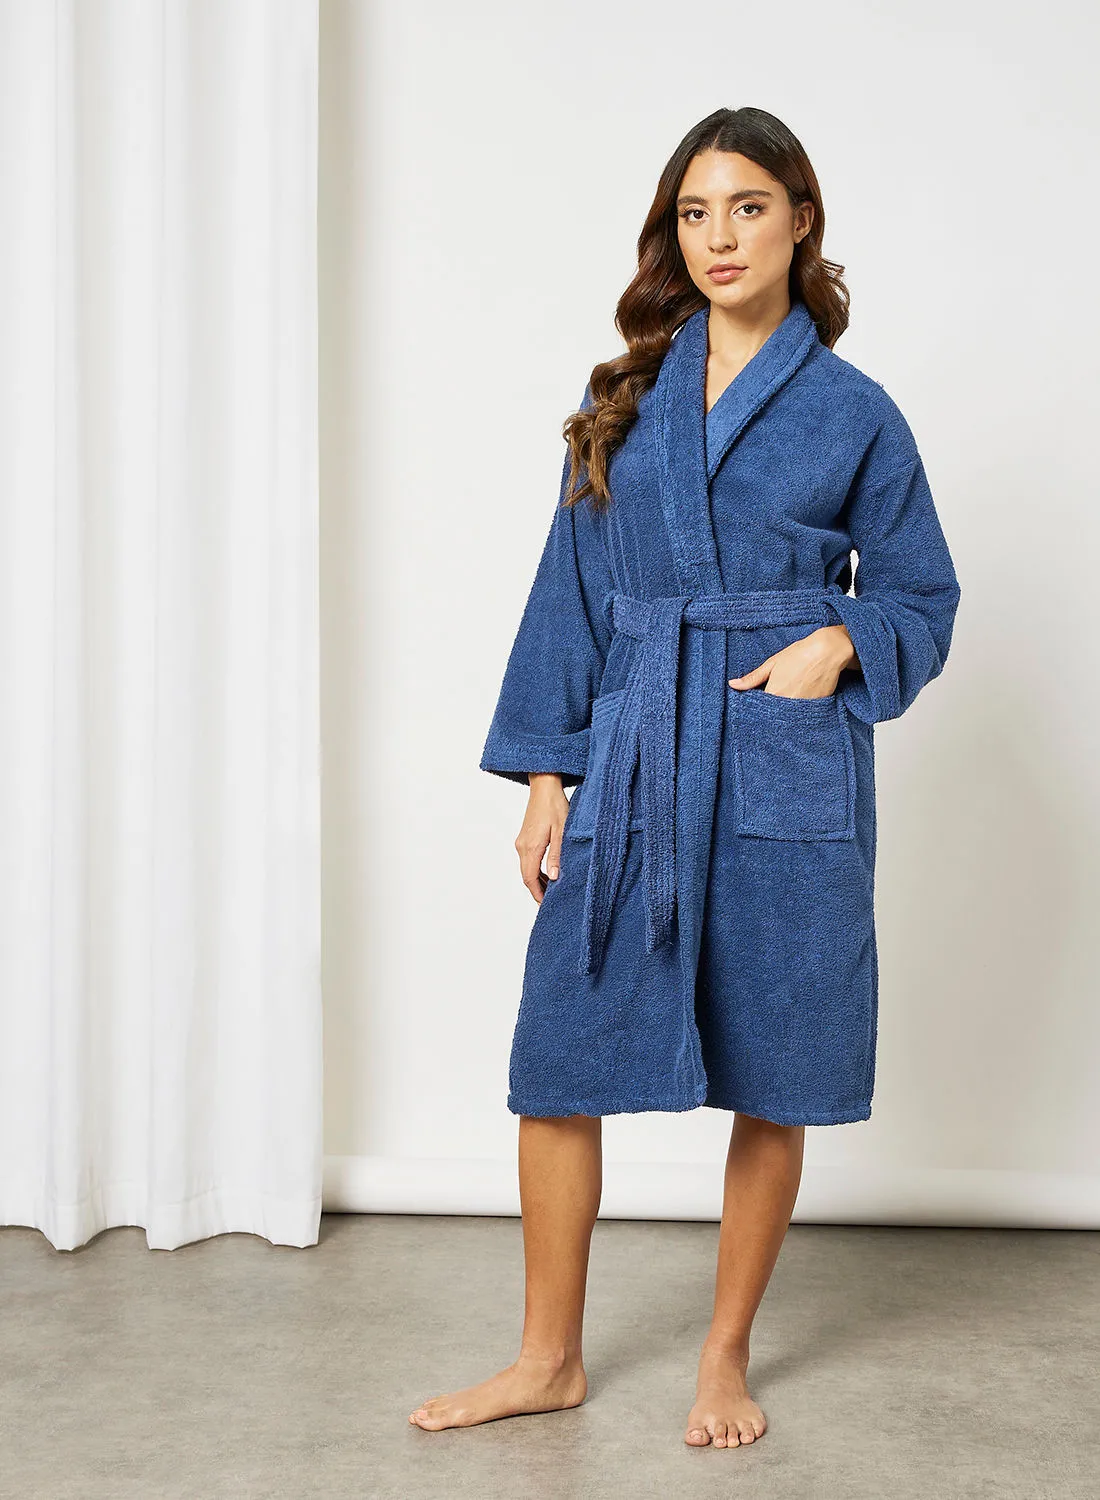 noon east Bathrobe - 400 GSM 100% Cotton Terry Silky Soft Spa Quality Comfort - Shawl Collar & Pocket - Navy Color - 1 Piece